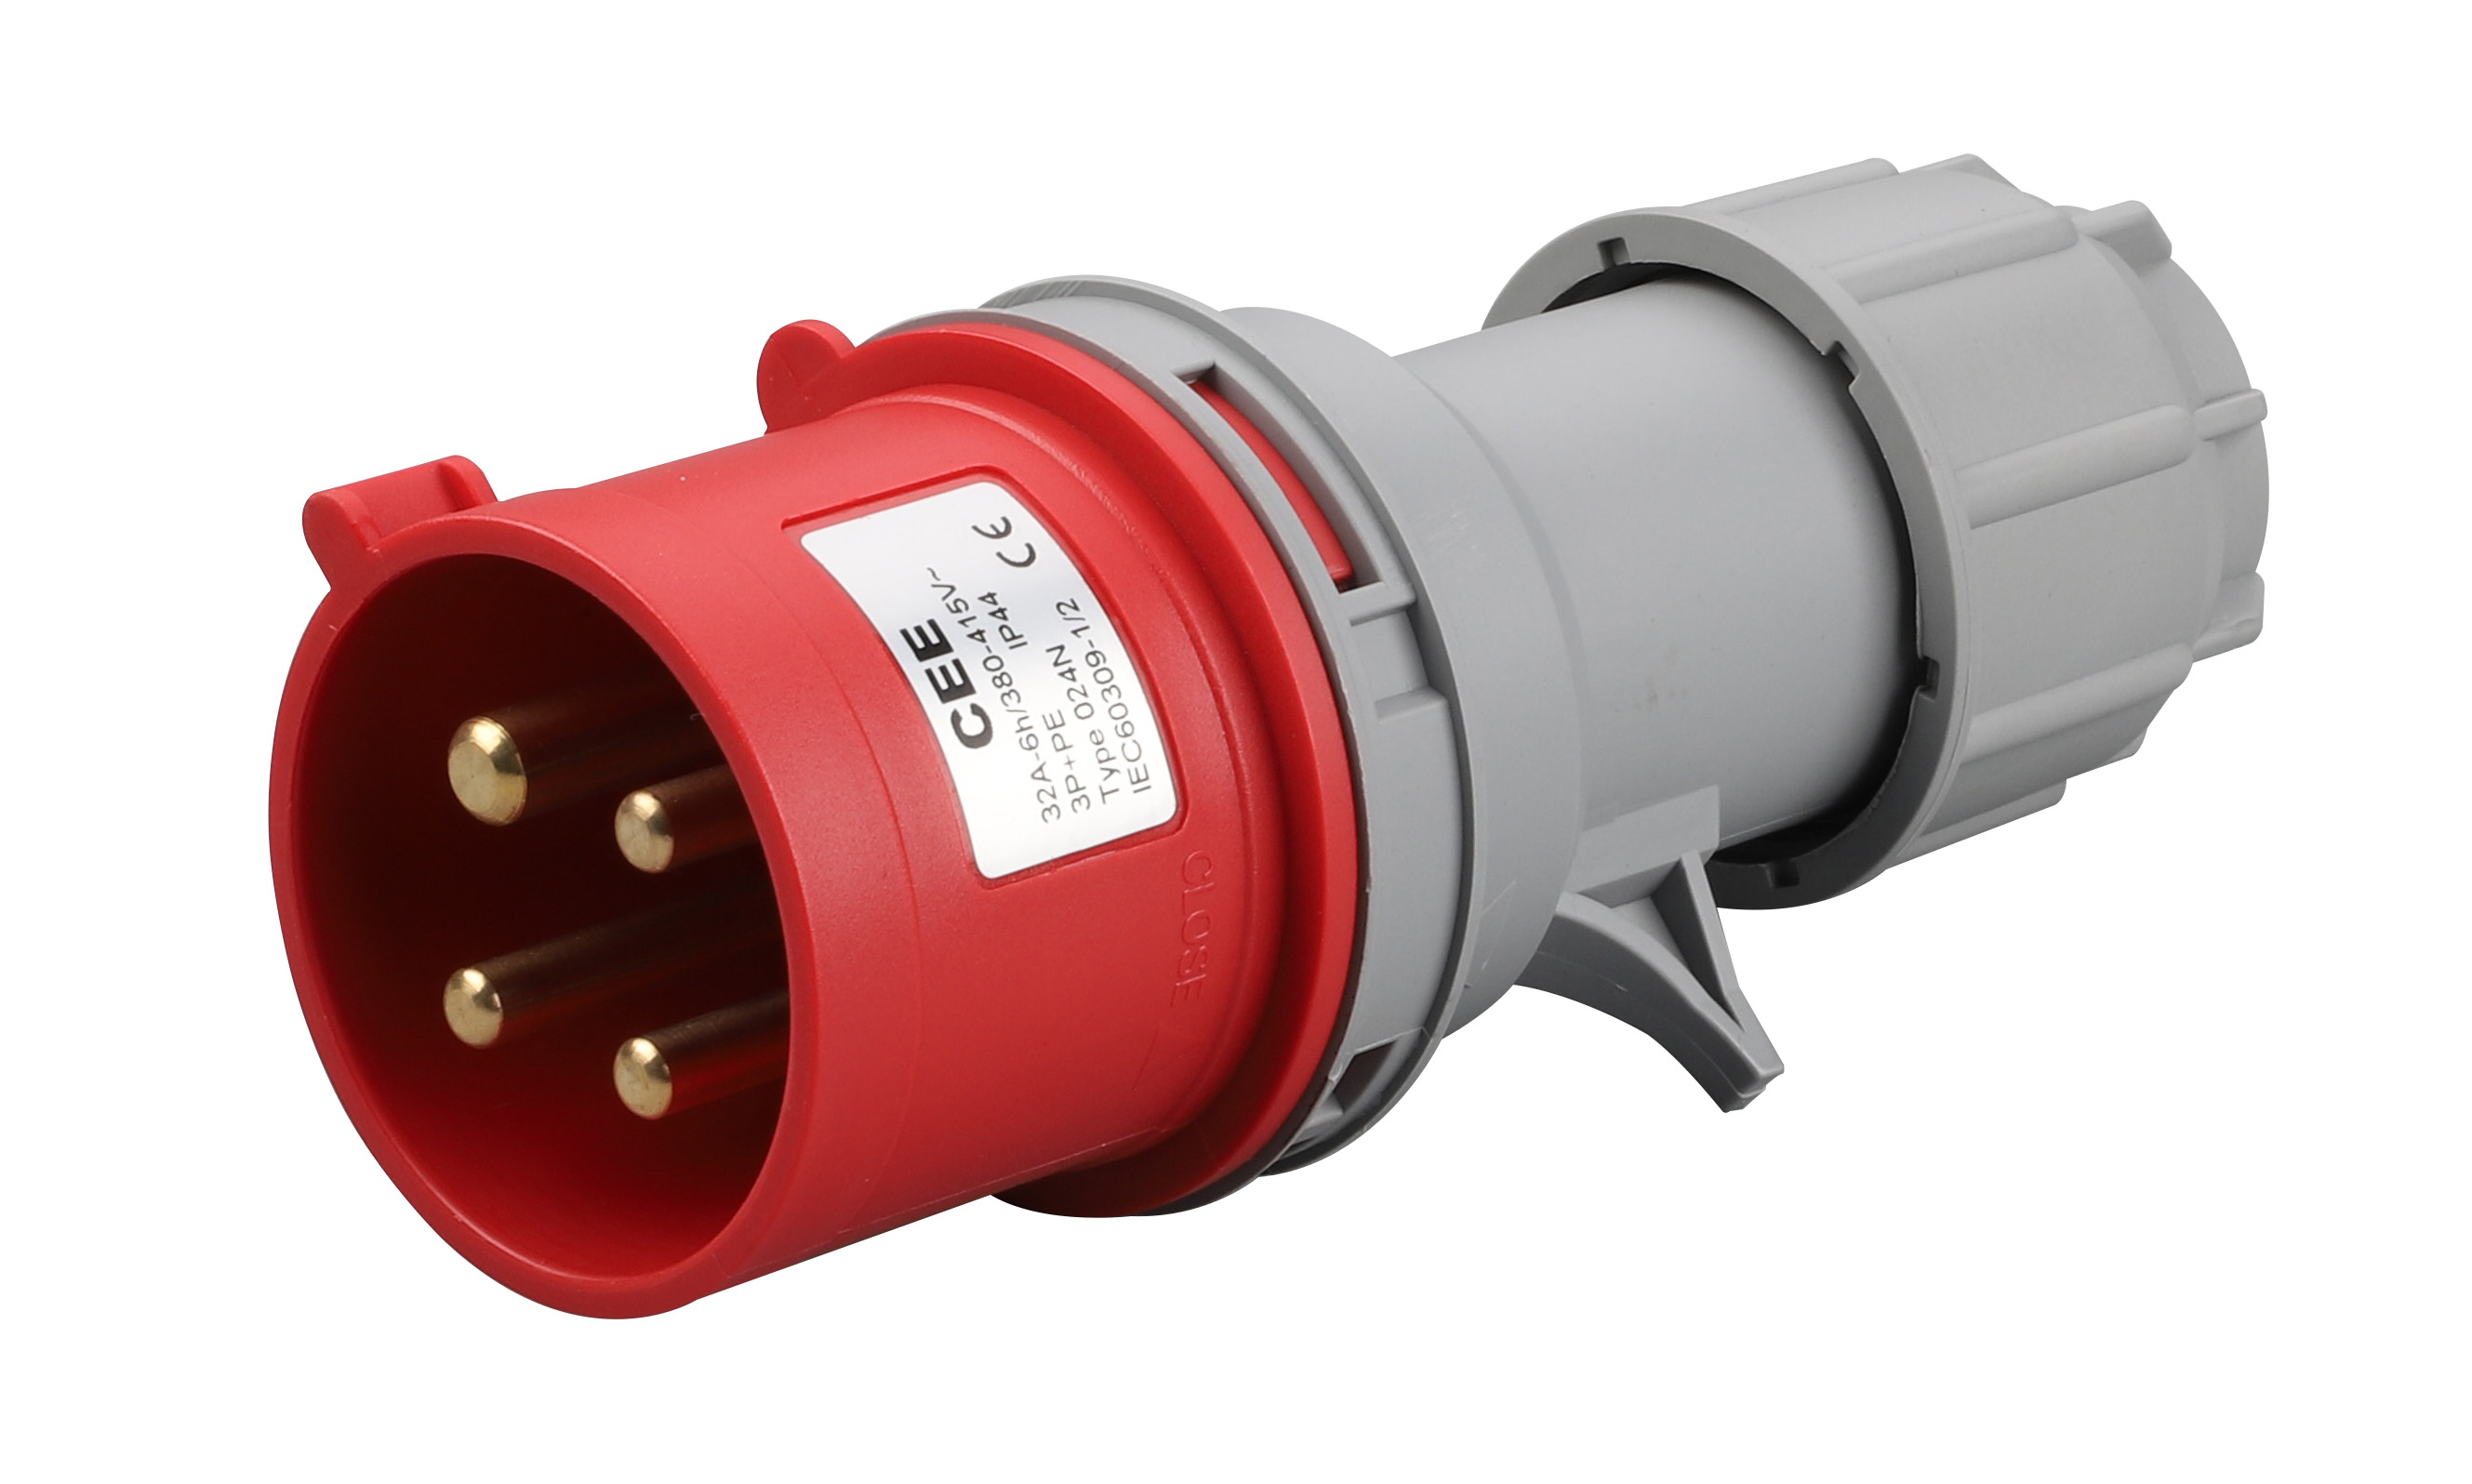 High Quality IP44 Plugs: The perfect solution for all your electrical needs